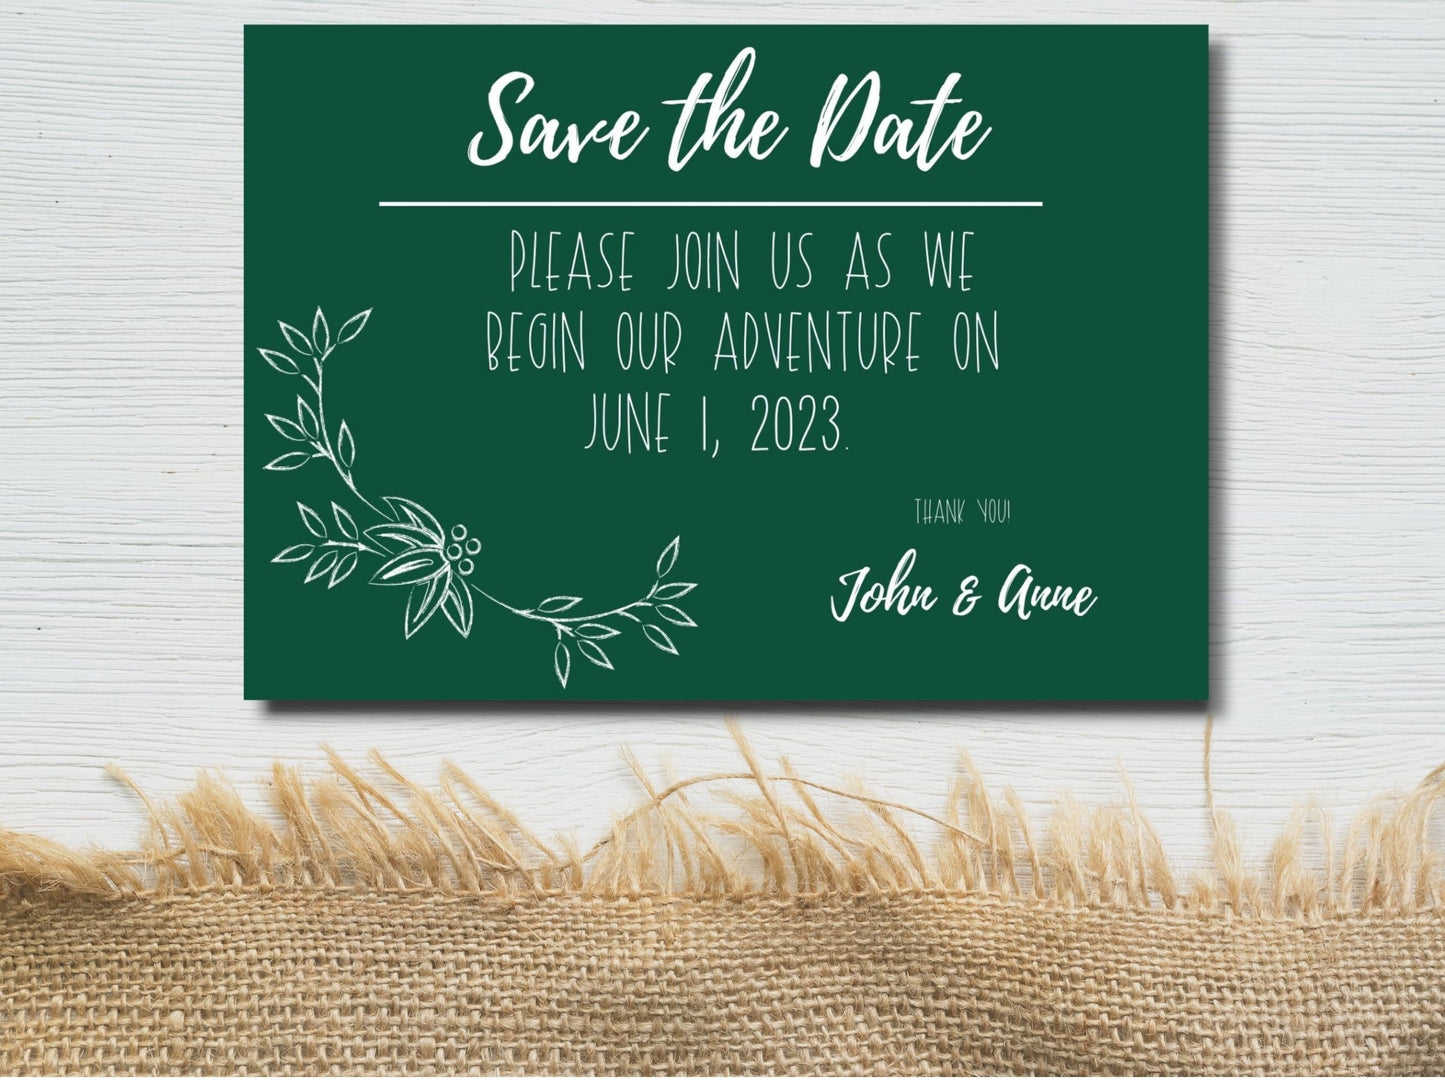 Elegant Emerald Green Save the Date Cards for Fall Weddings - Jewel Tones Collection